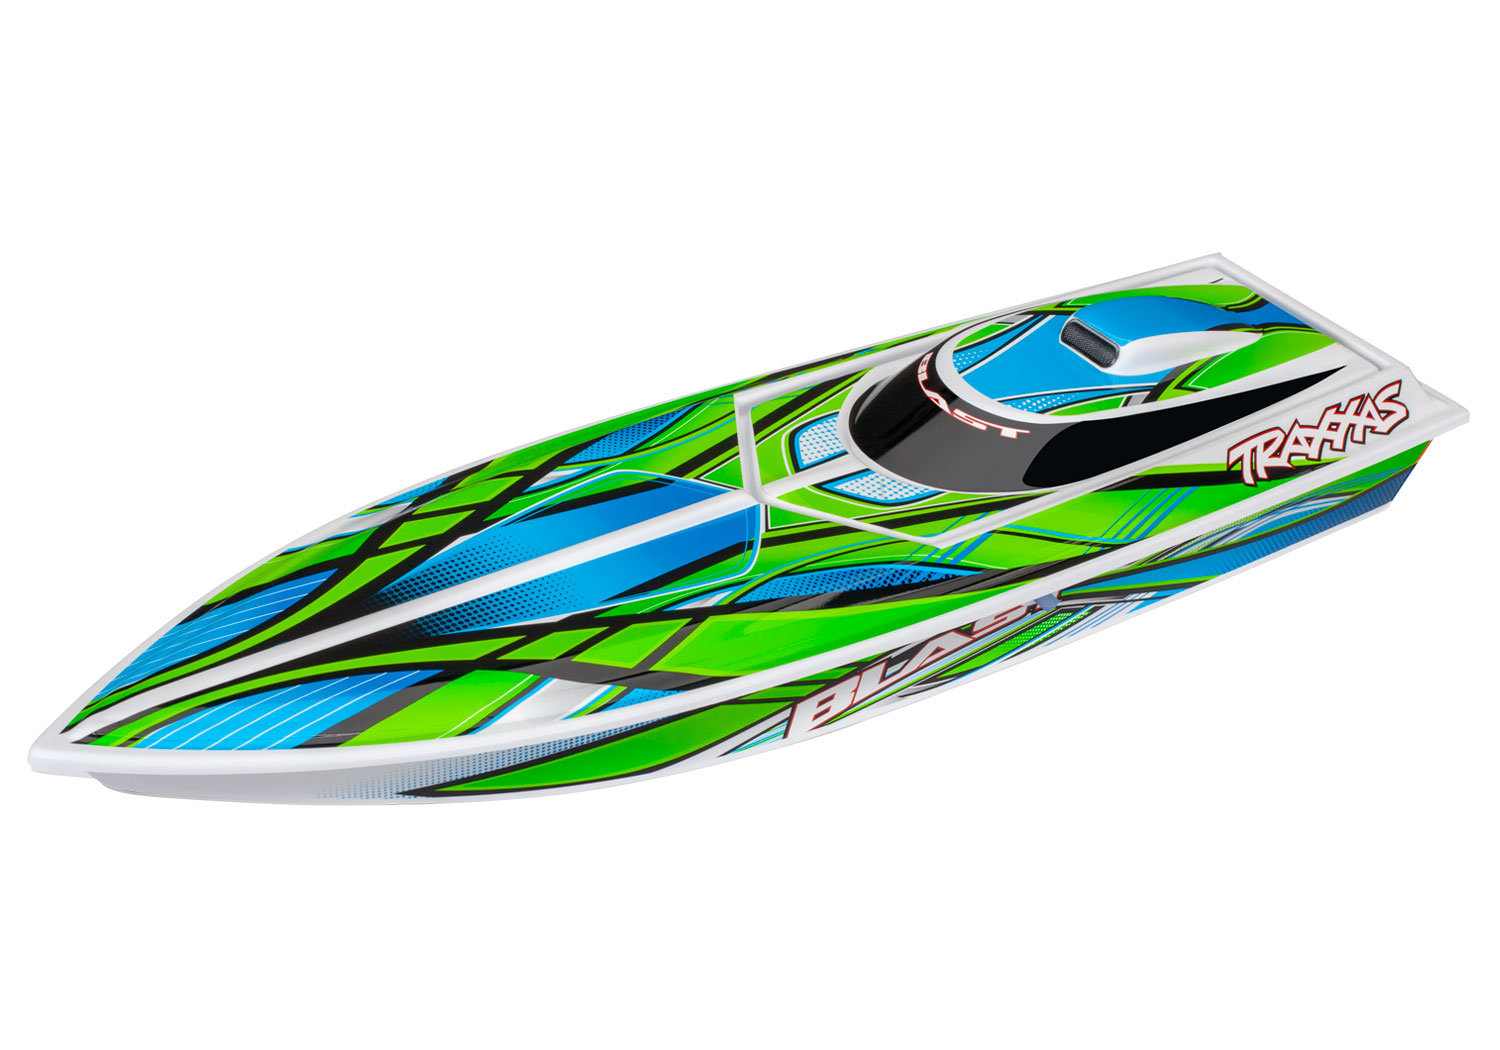 Traxxas Blast High Performance Boat RTR 2.4Ghz Groen - inclusief Power Pack